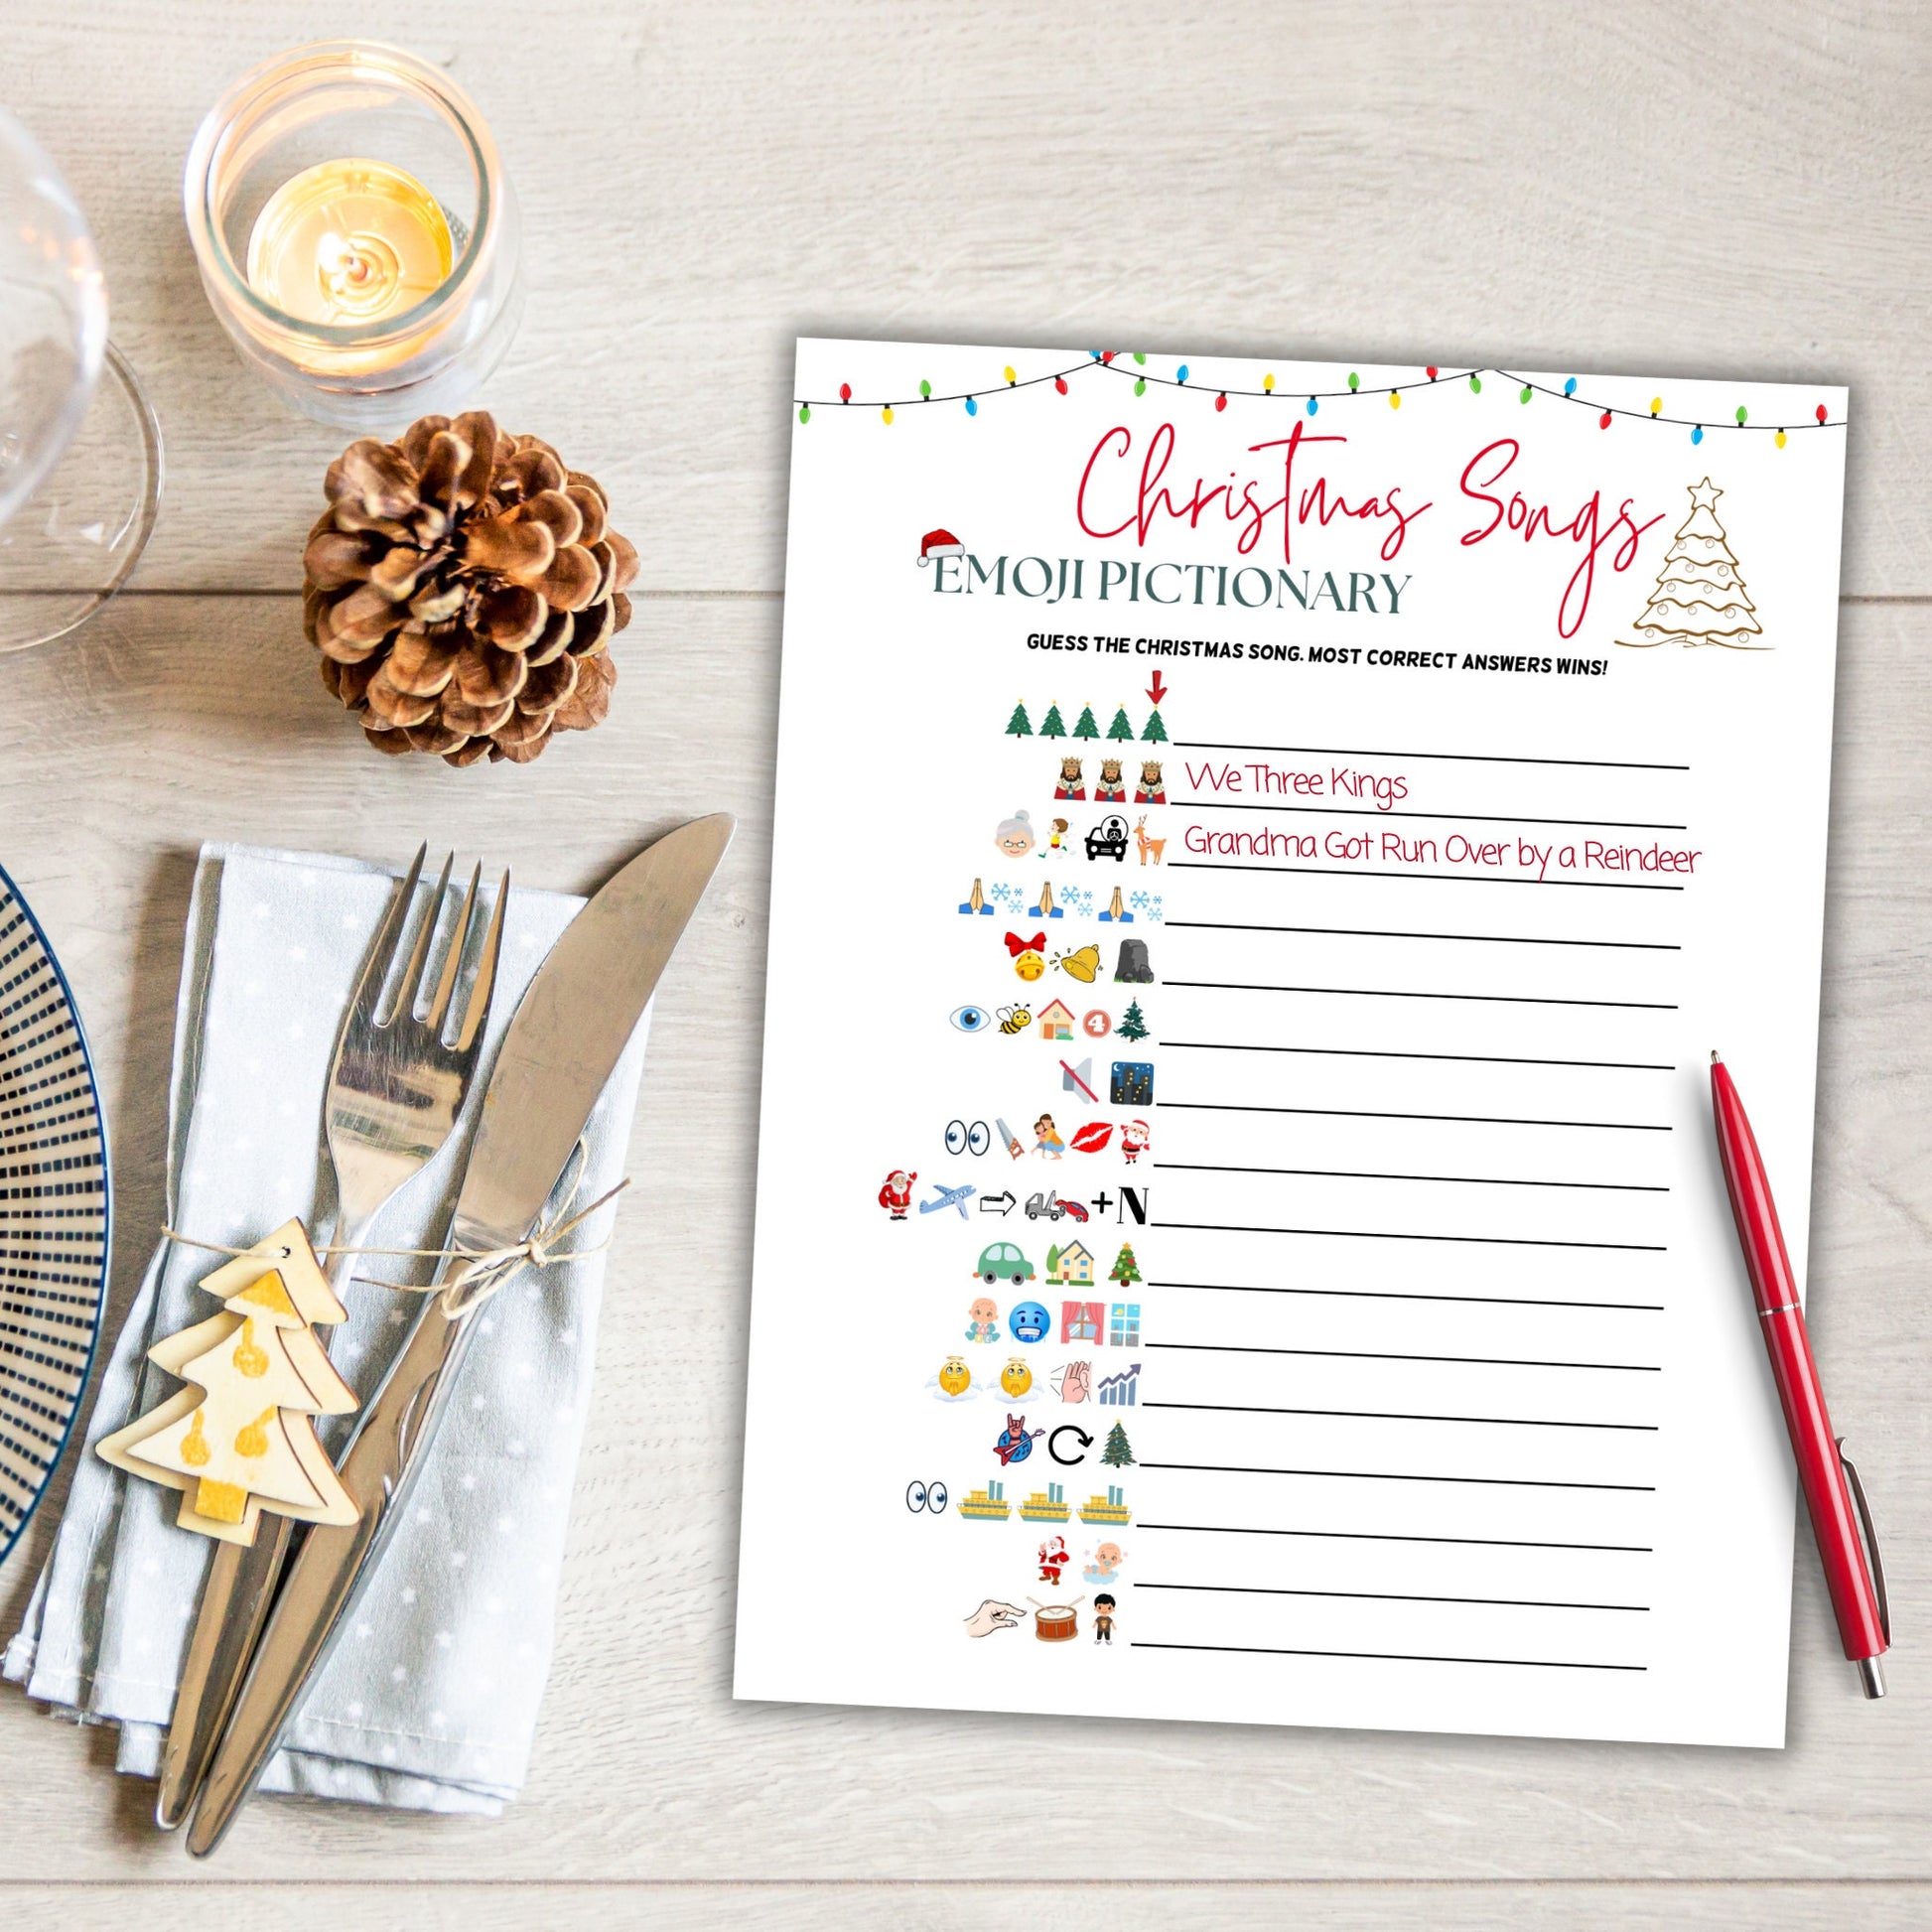 Christmas Songs Emoji Pictionary Printable, Christmas Guessing Game, Xmas Movie Emoji Game, Fun Holiday Family Game, Office Work Party Game